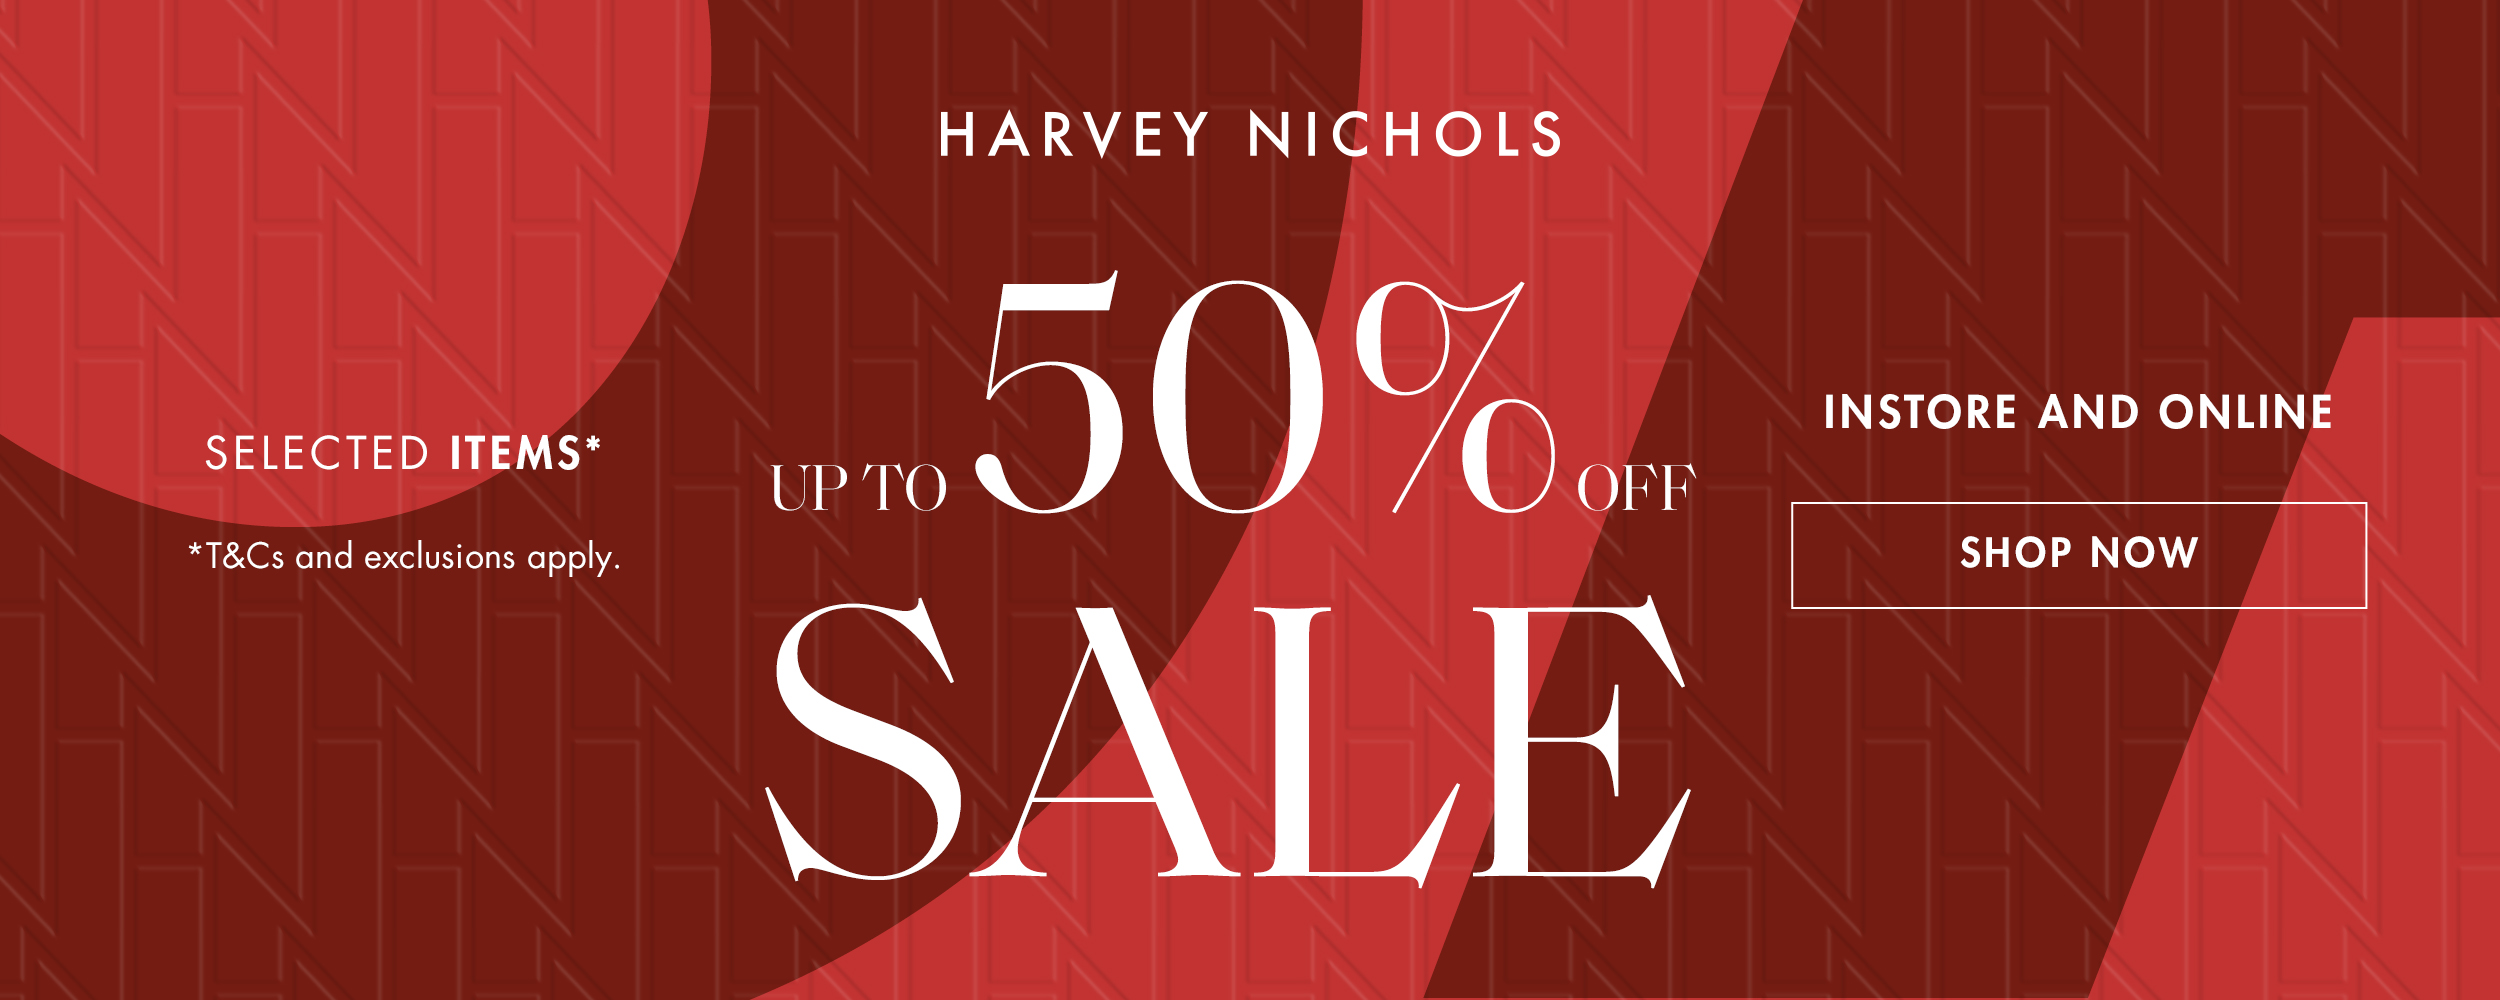 Enjoy up to 50% off Fashion, Shoes and Accessories at Harvey Nichols.